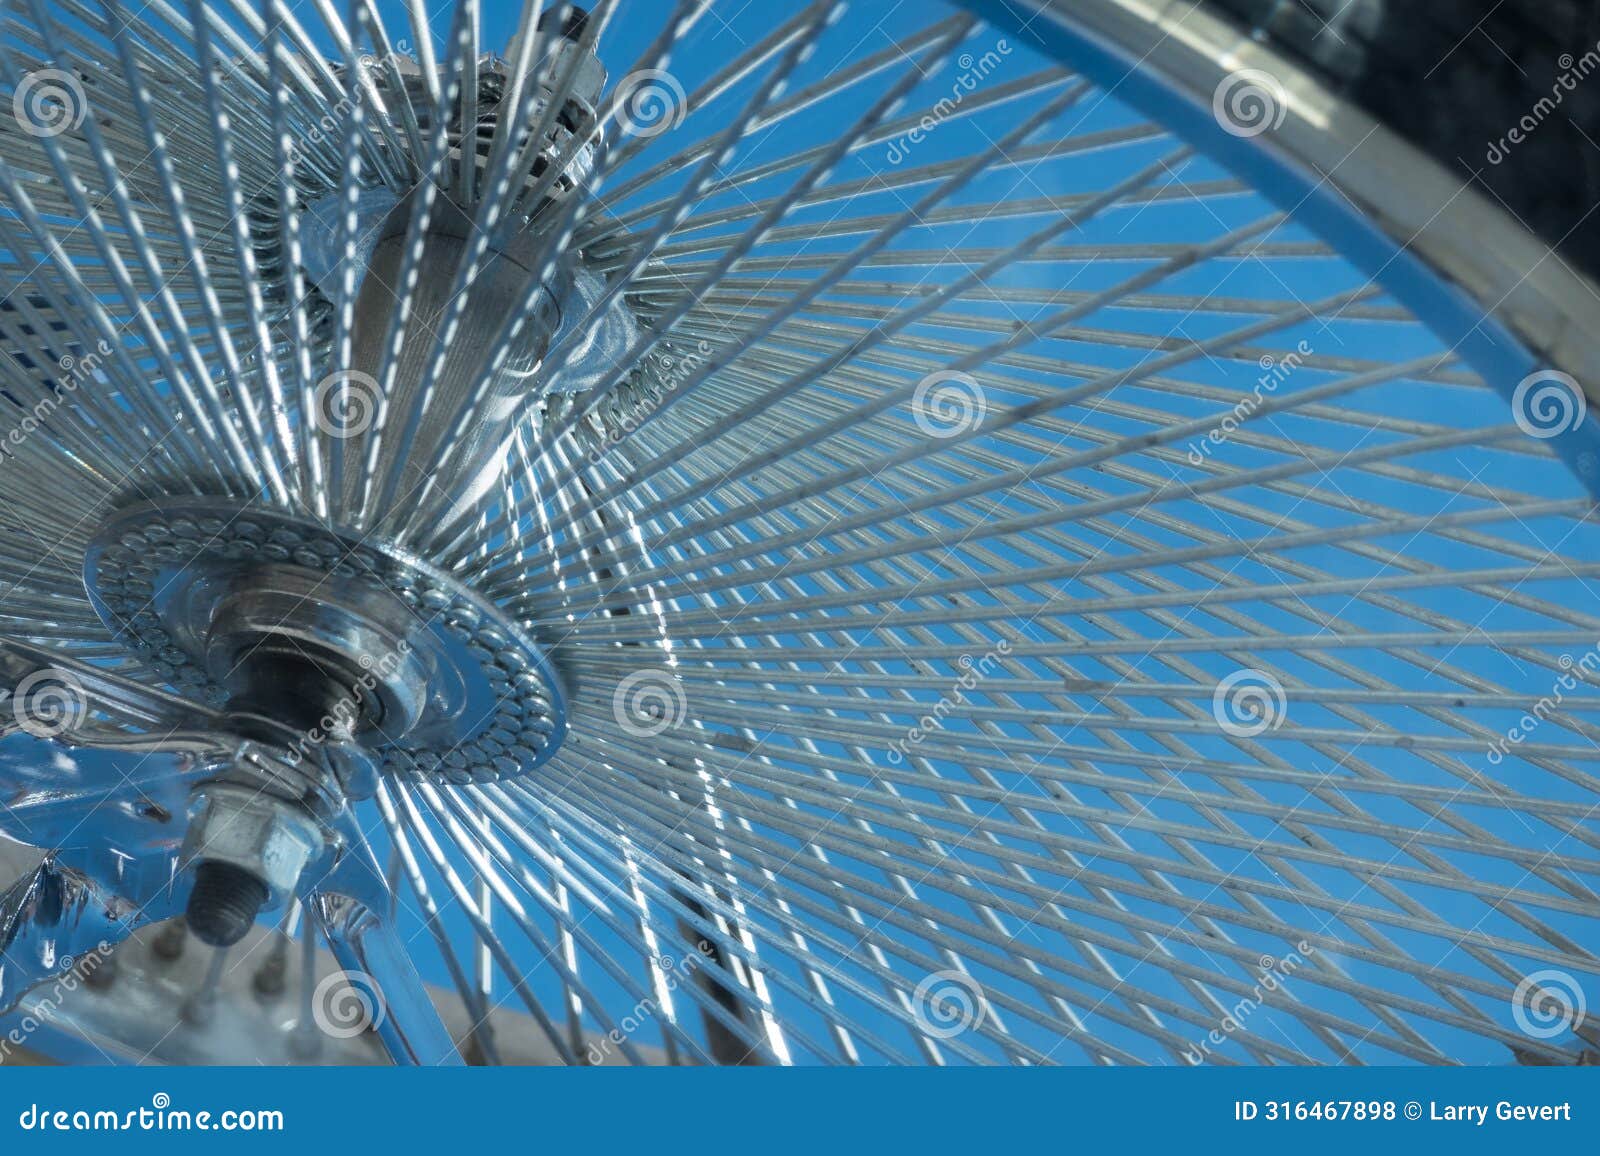 an array of spokes on a bicycle wheel